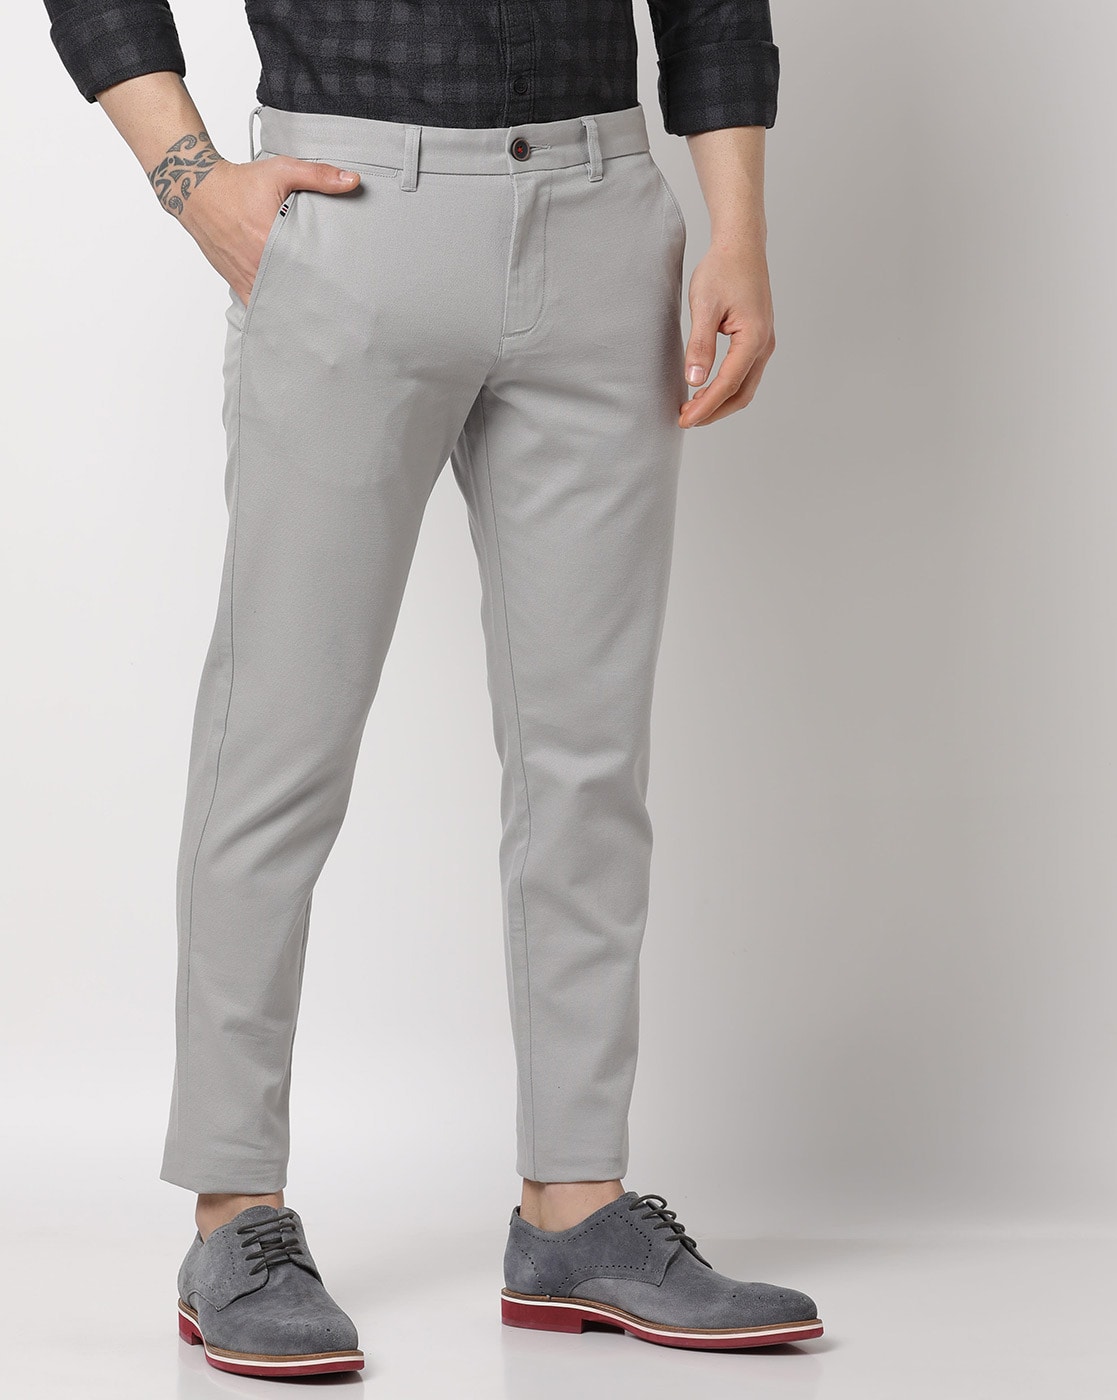 Buy Trousers for Women Online at Best Prices in India - Westside